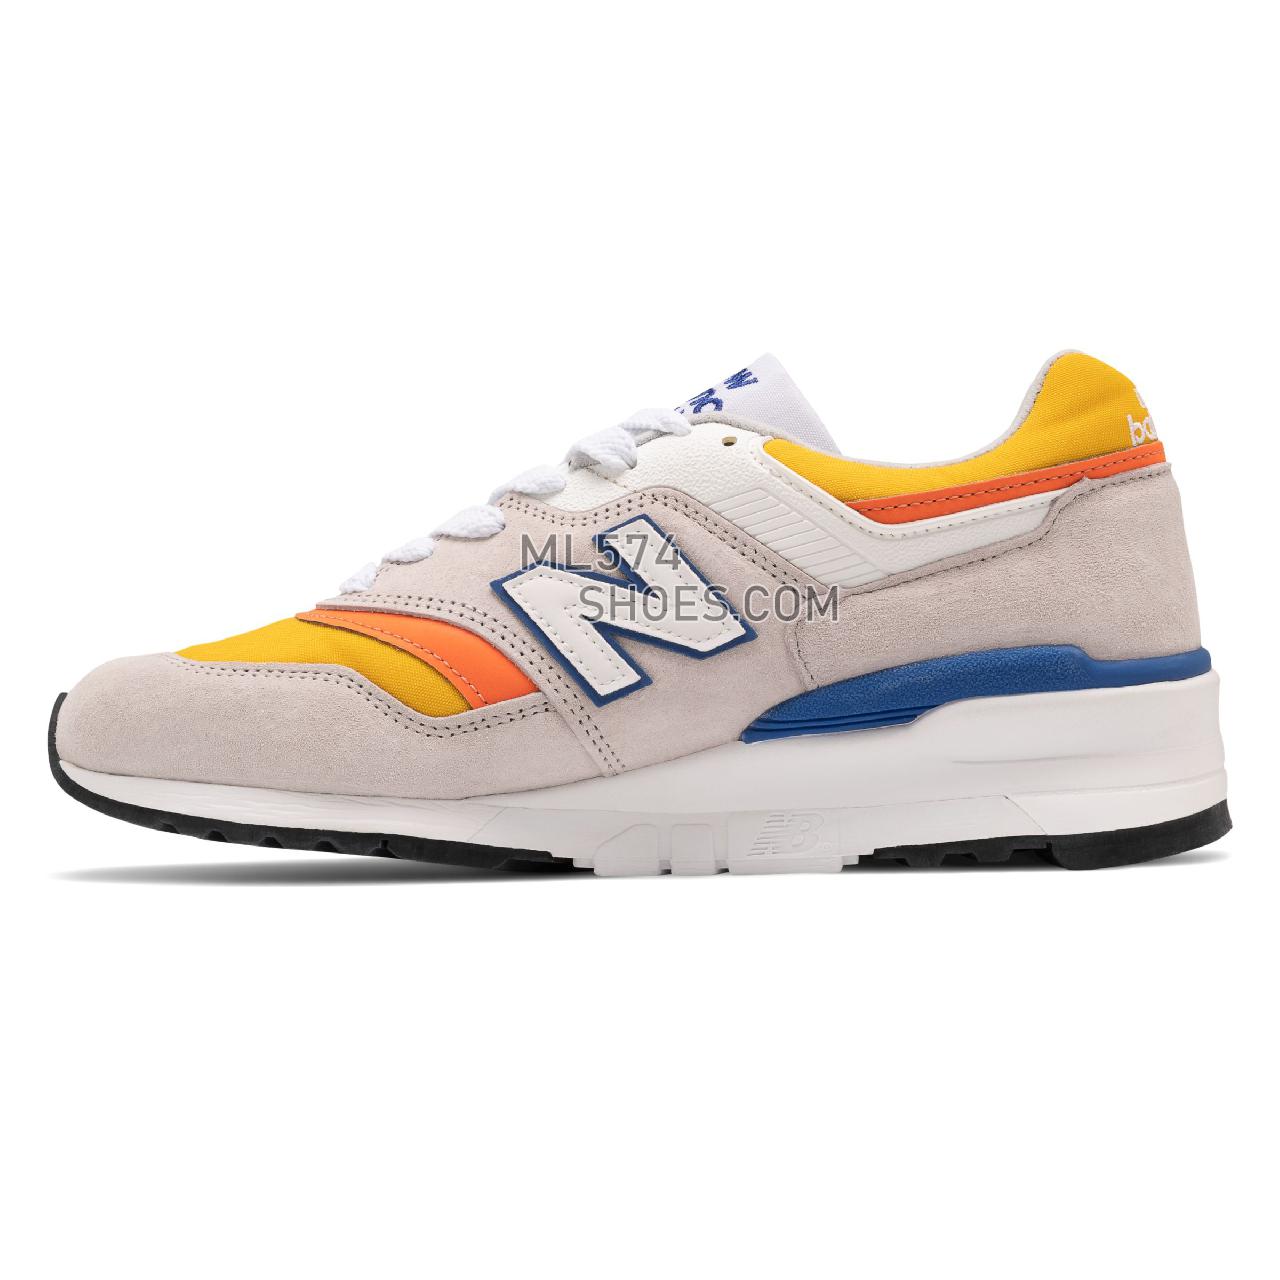 New Balance Made in USA 997 - Men's Made in USA And UK Sneakers - Grey with Orange - M997PT